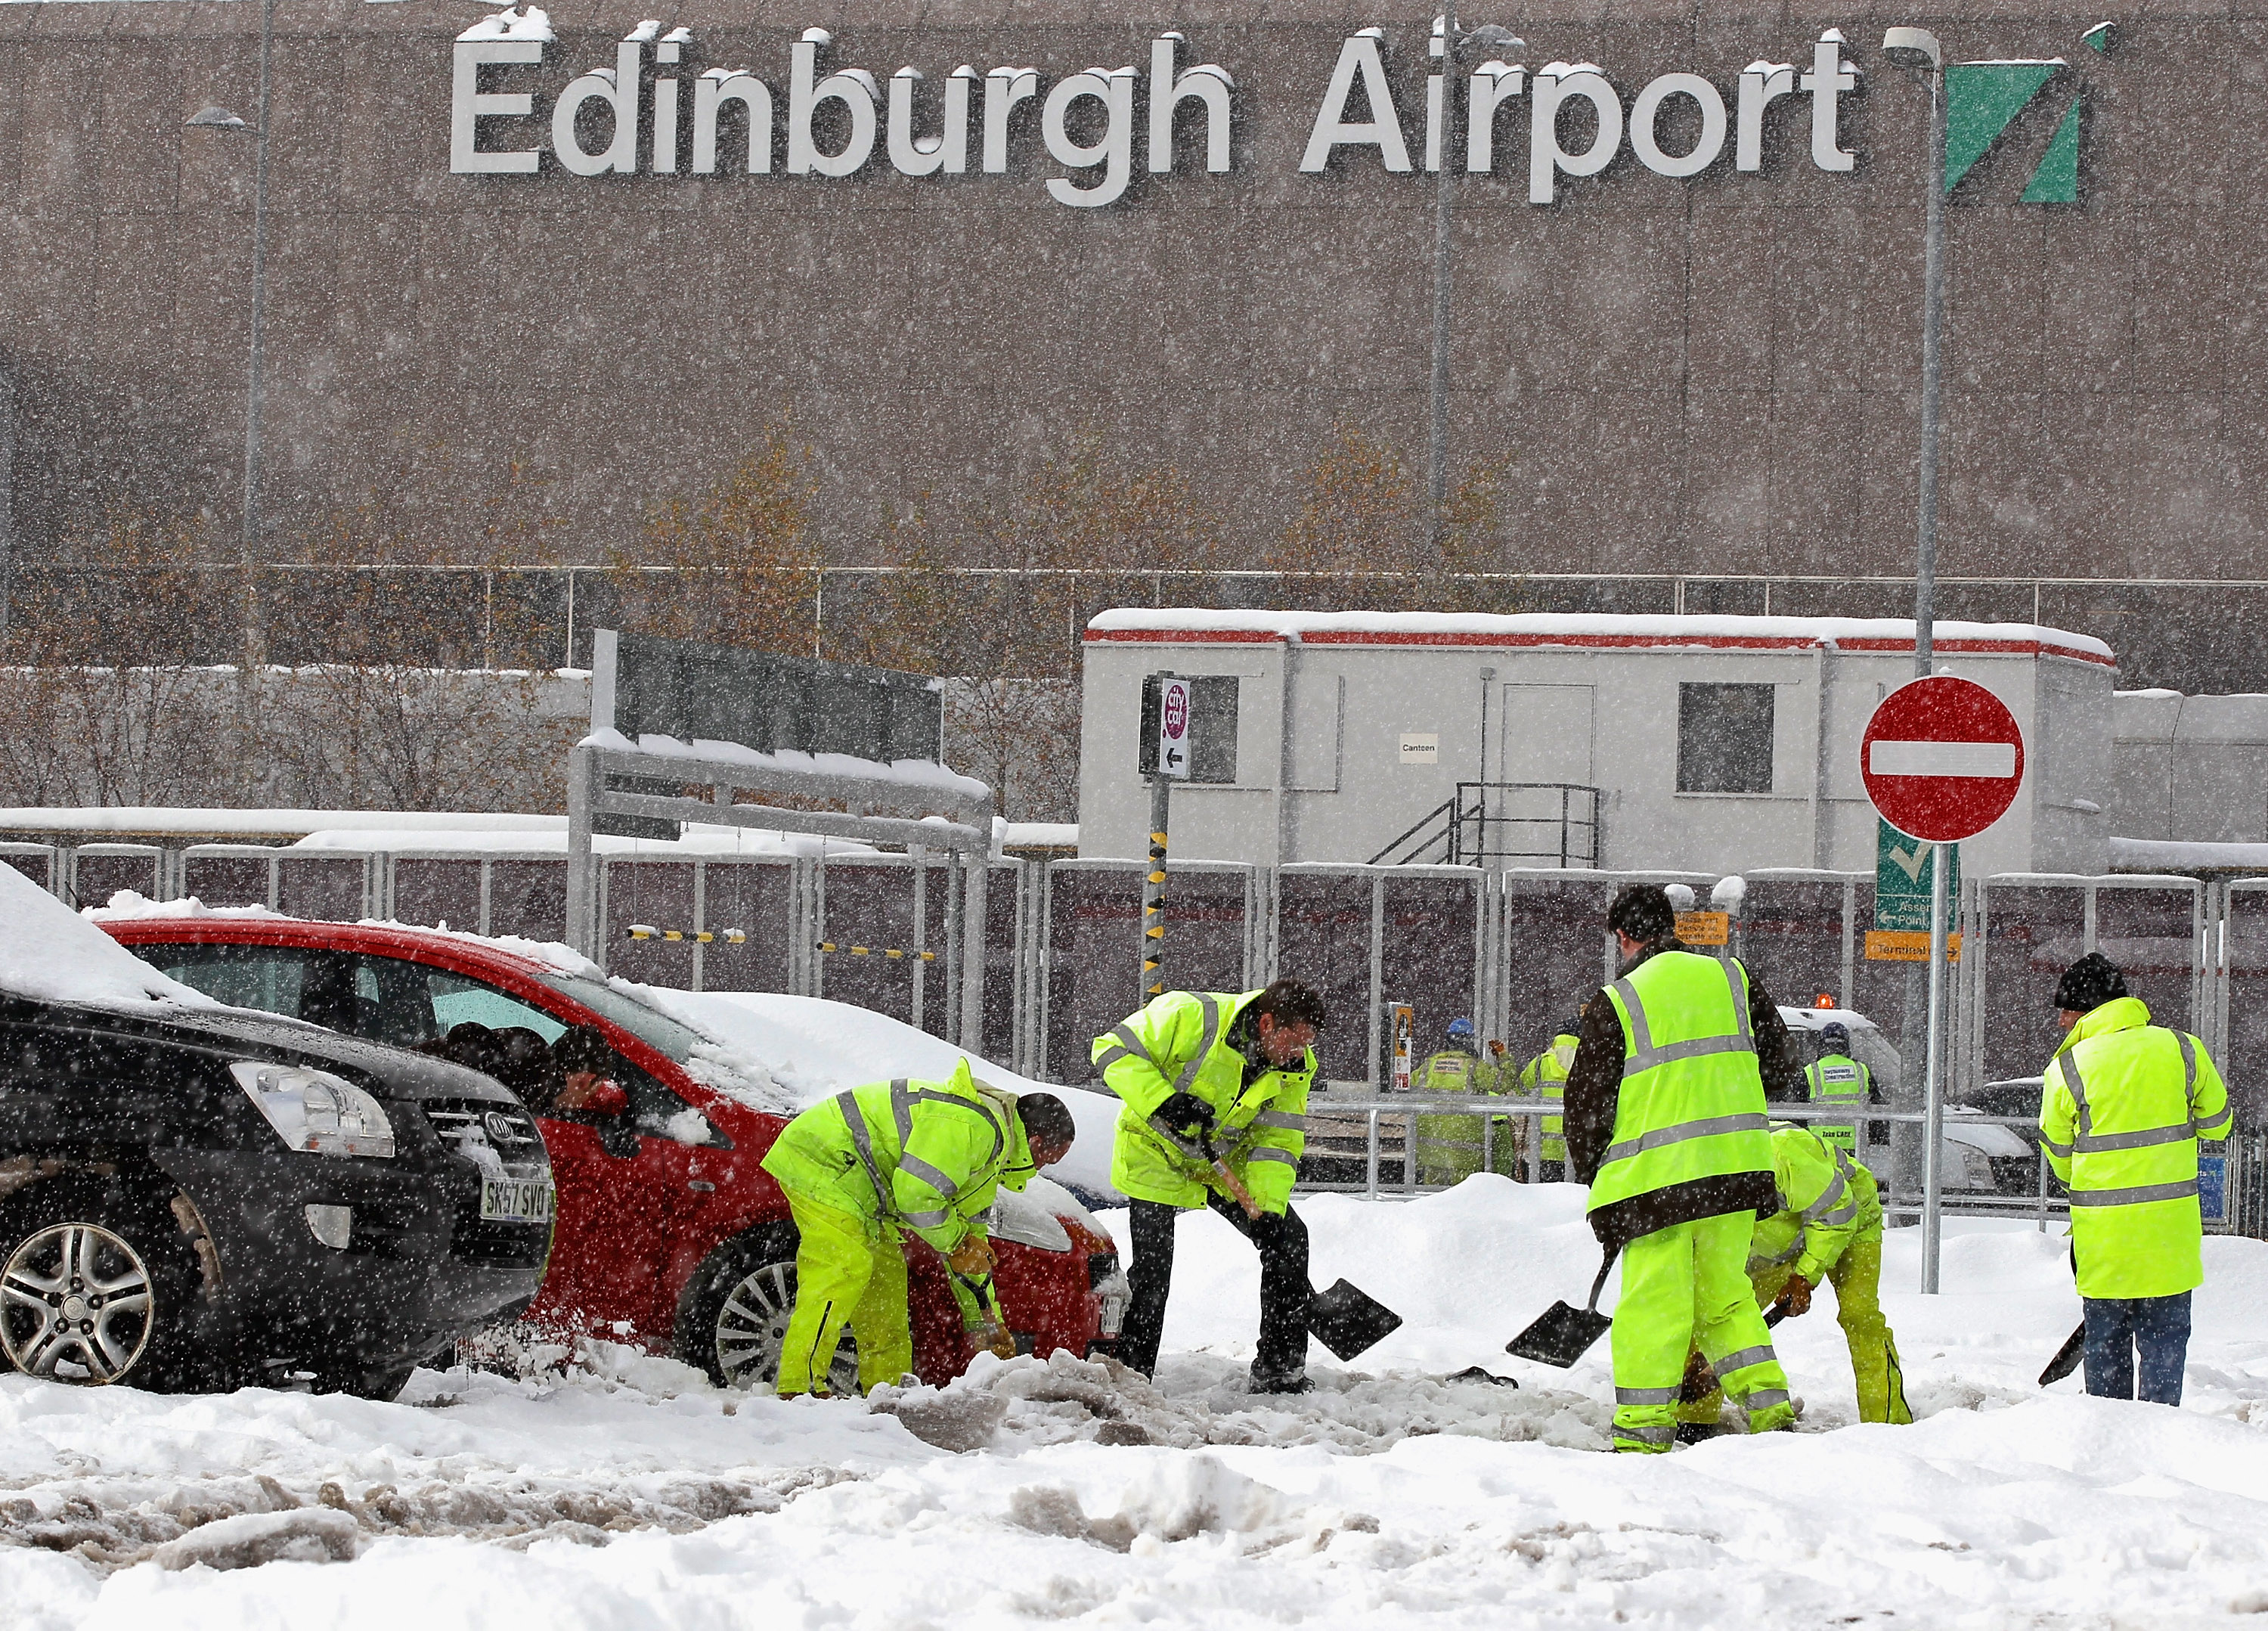 Freezing weather conditions and heavy snow have forced Scotland's main airport to close for the day on December 1, 2010.